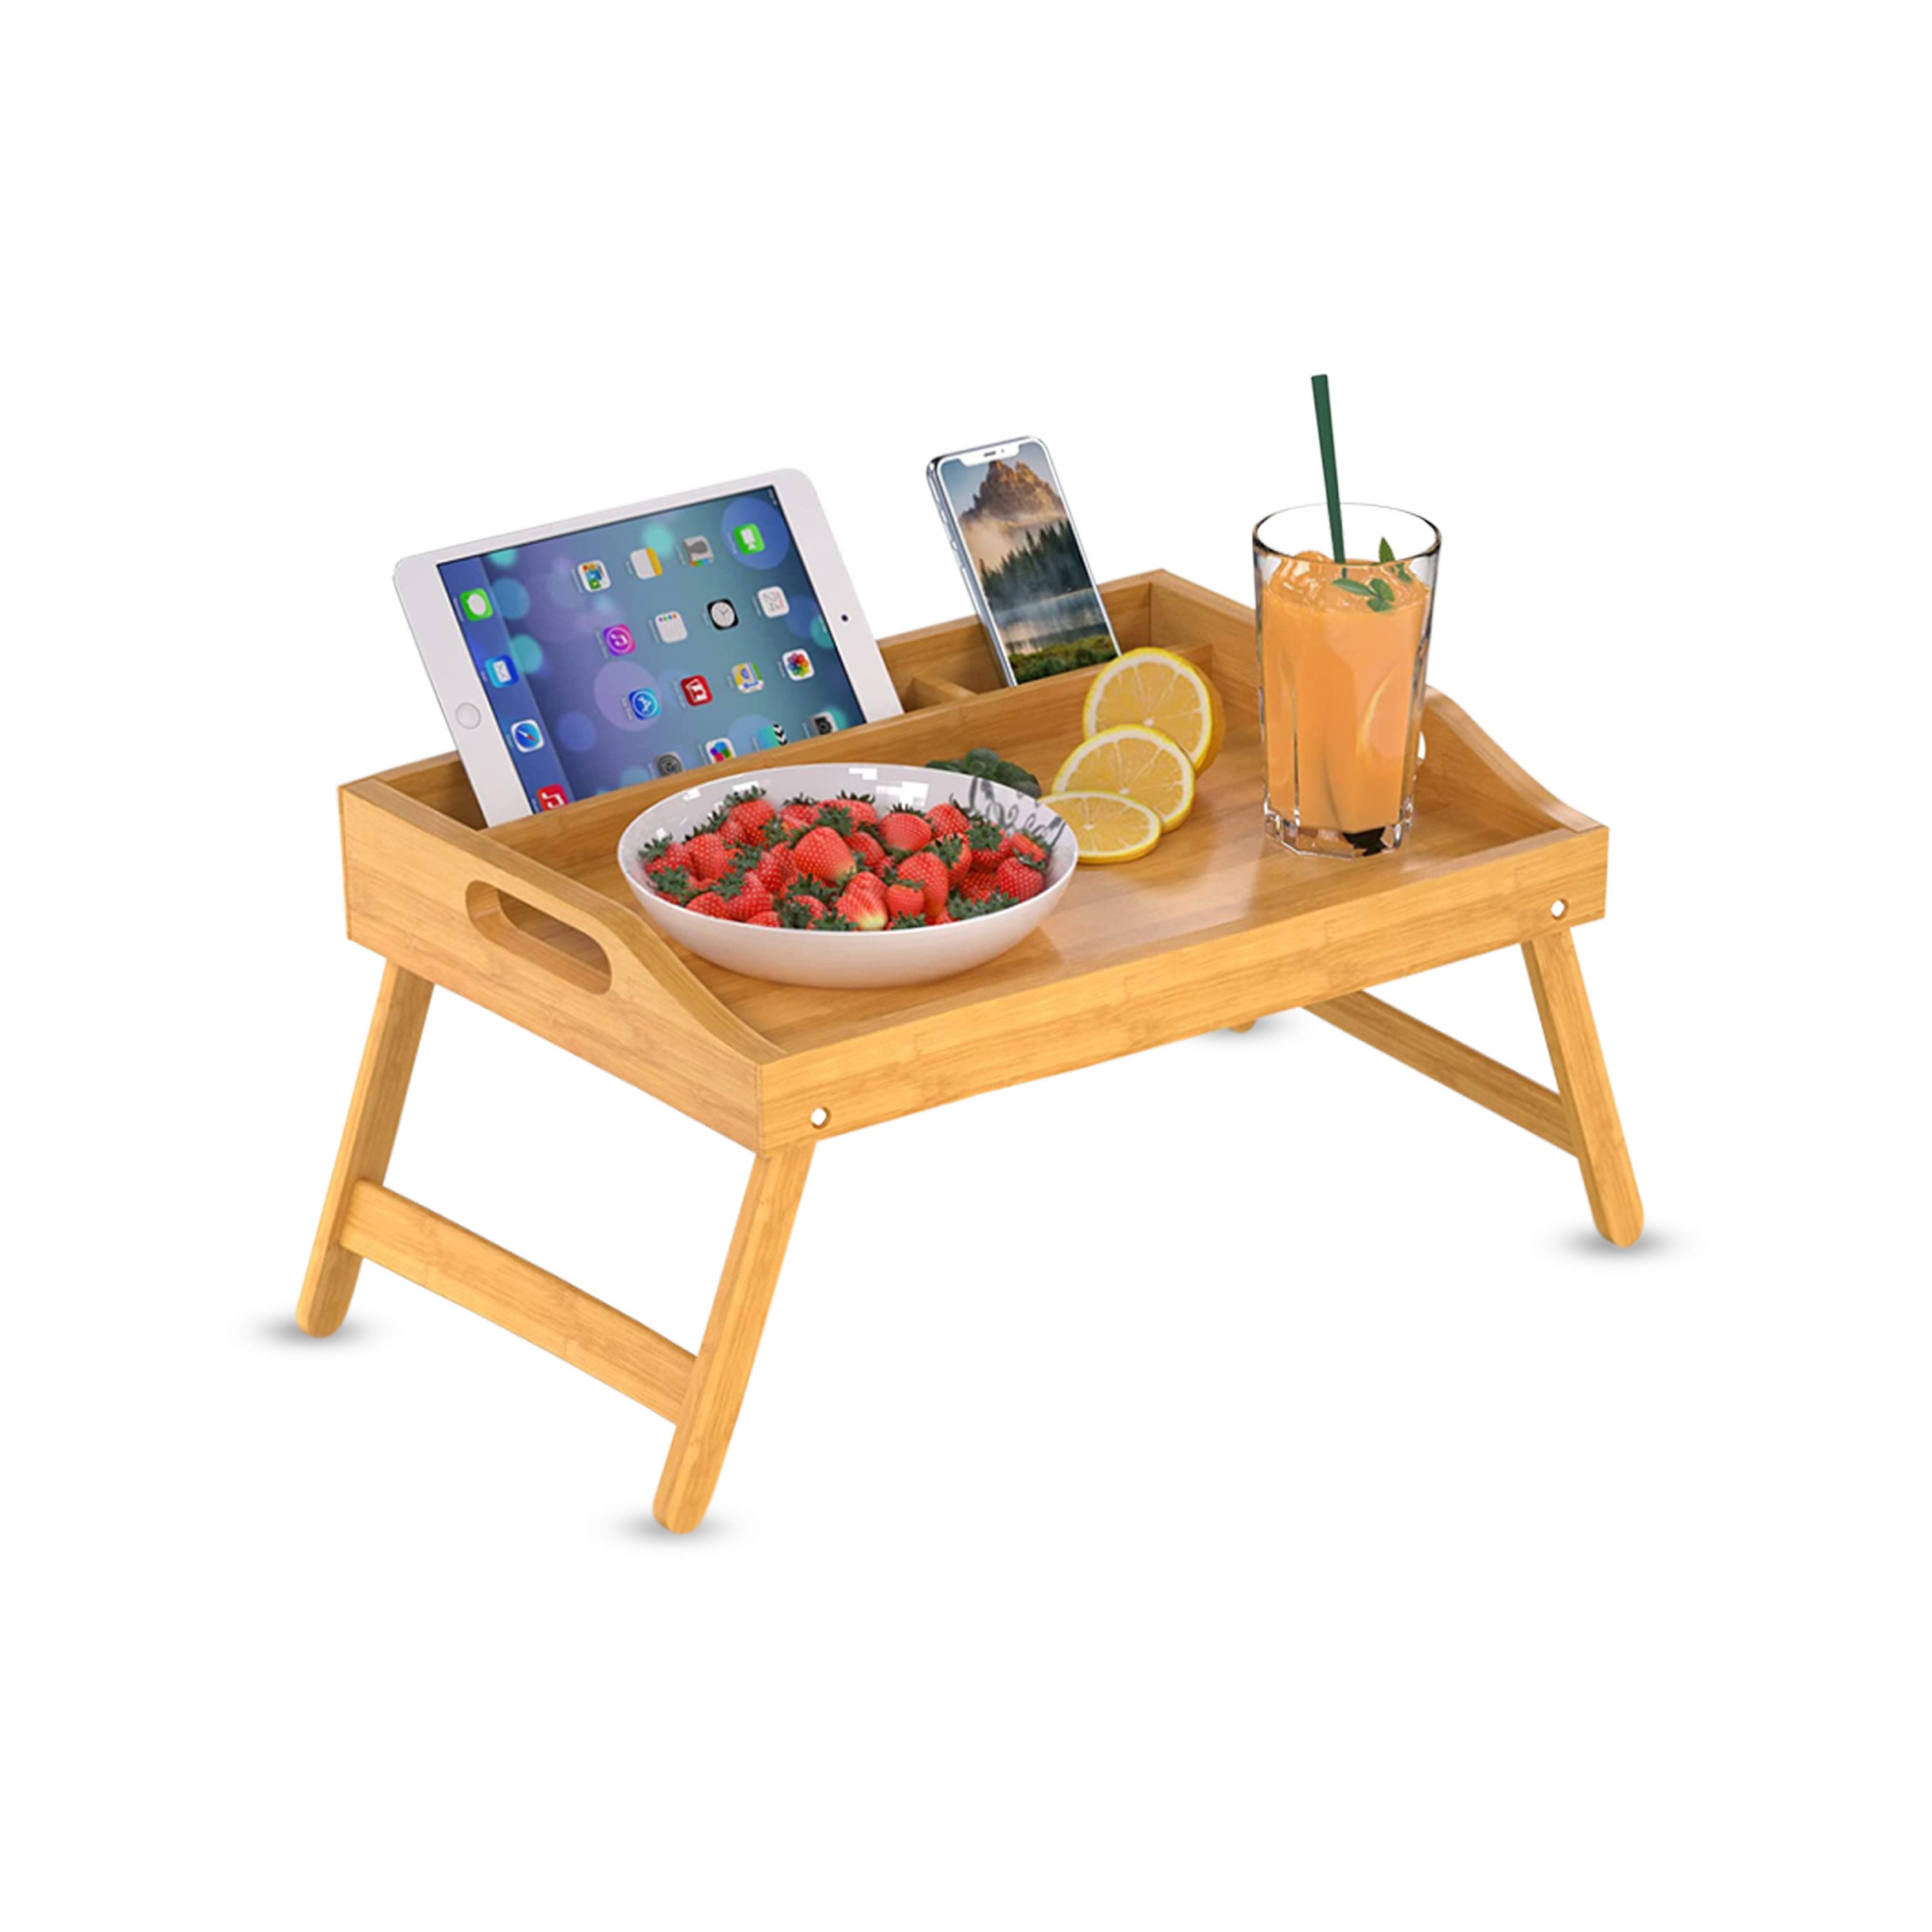 LINEN 72 Wood Lap TRAY: High Quality Bean Bag Cushion, Breakfast in Bed, TV  Dinner, Laptop, Pillow Tray Table Desk 